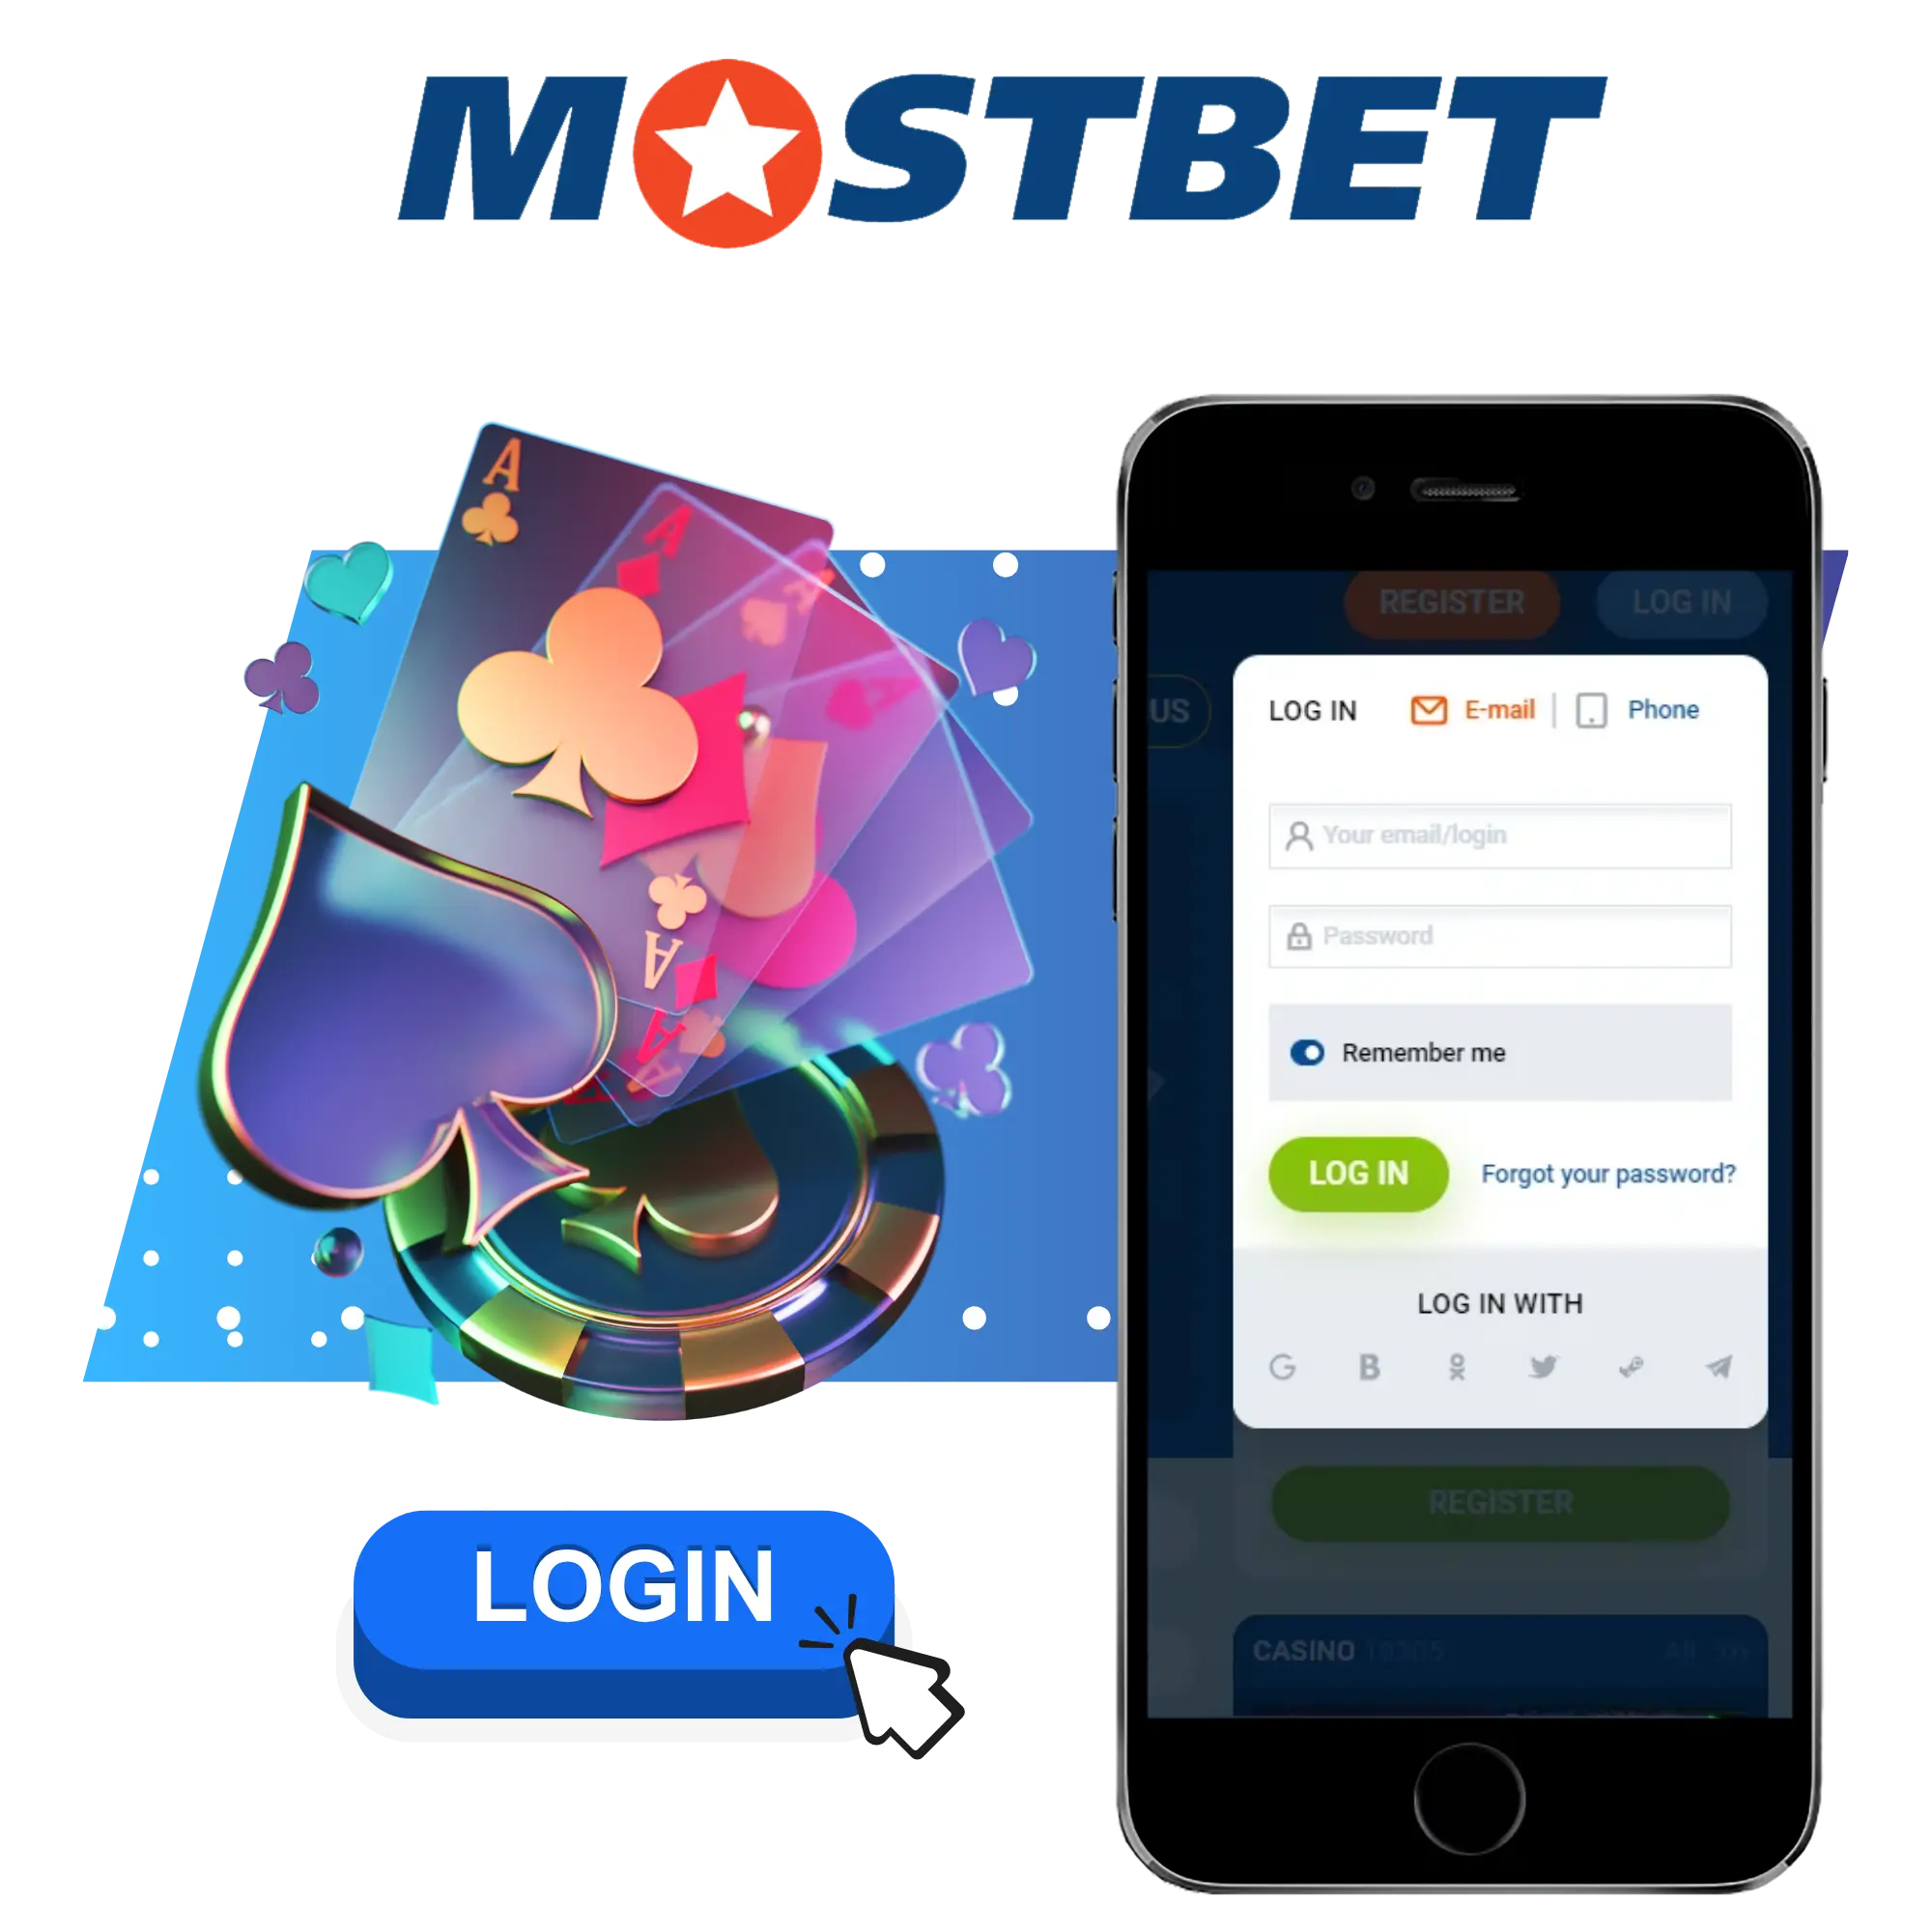 10 Ideas About Mostbet in Hungary | Your casino and bookmaker center That Really Work